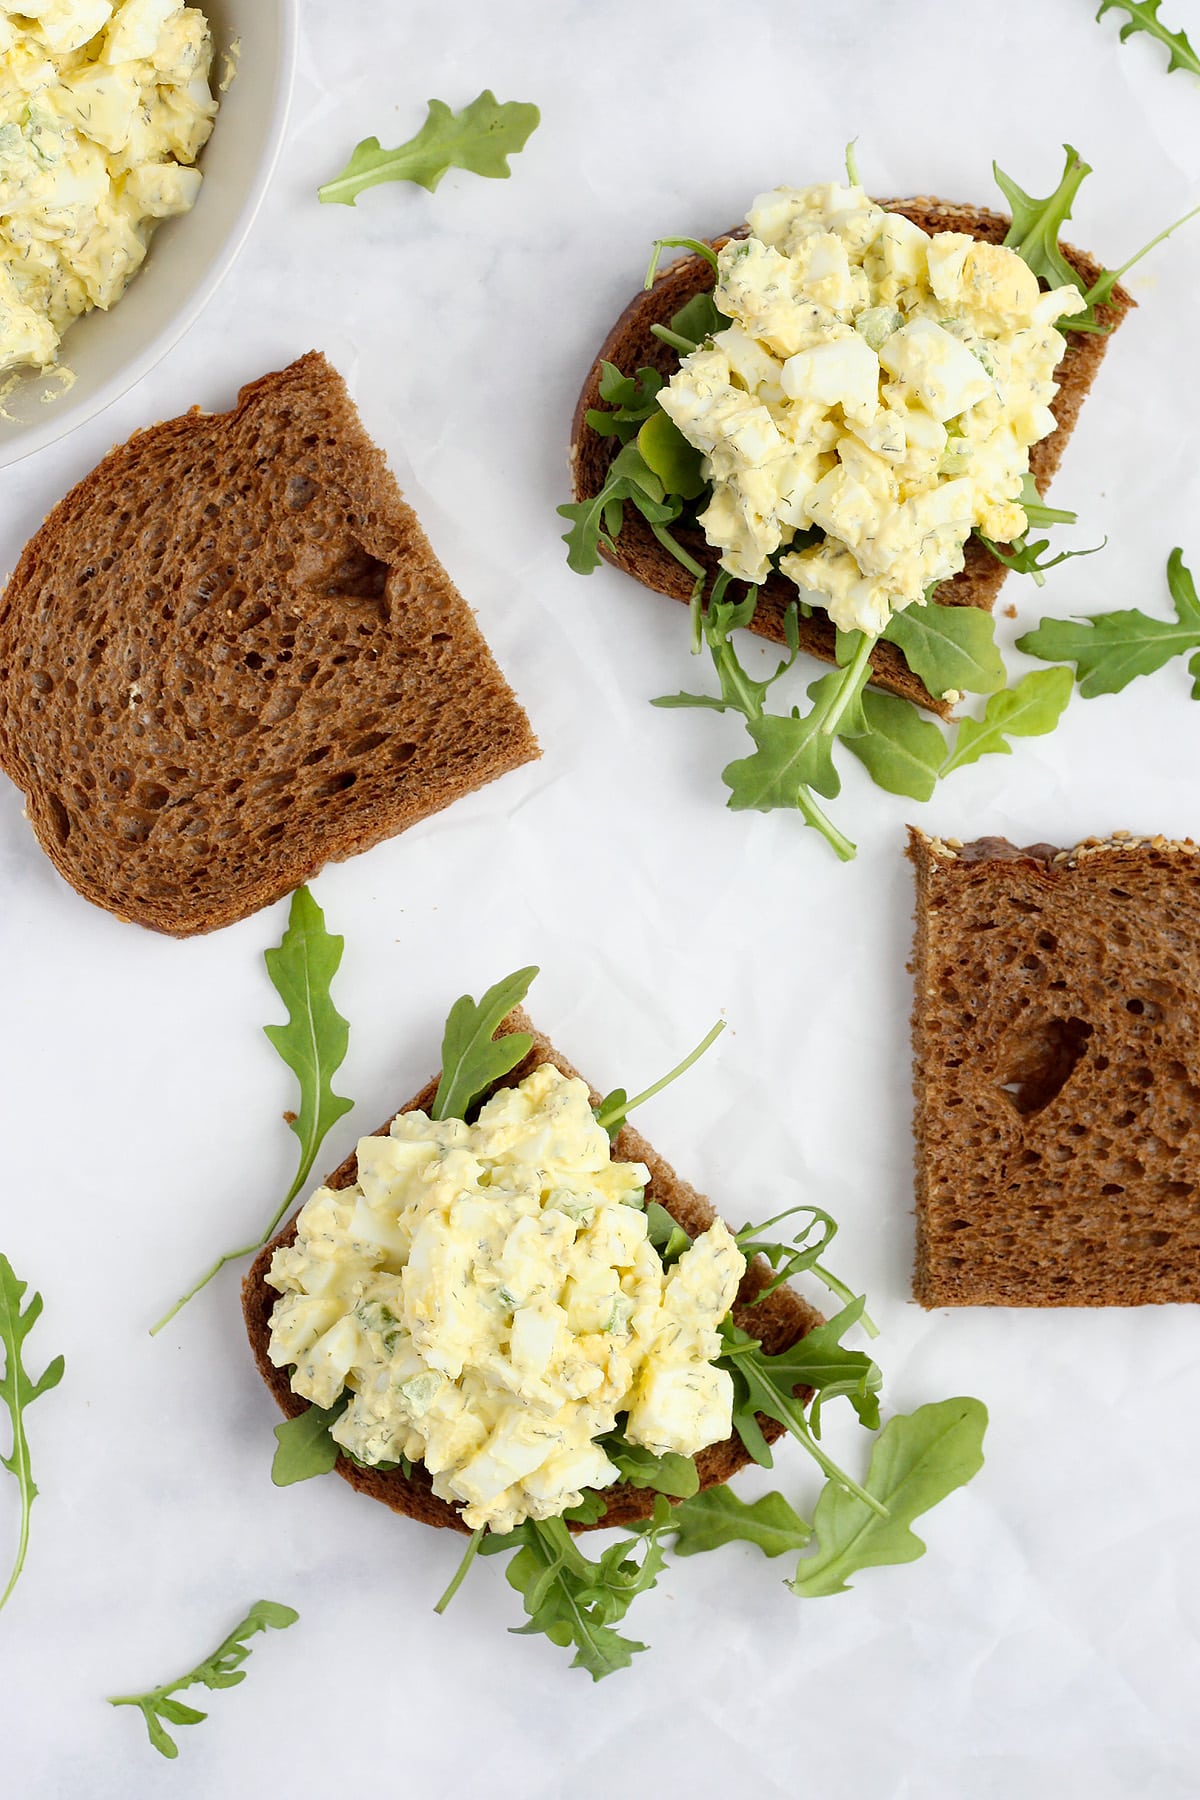 Slices of bread topped with arugula and ،memade egg salad on a marble countertop.